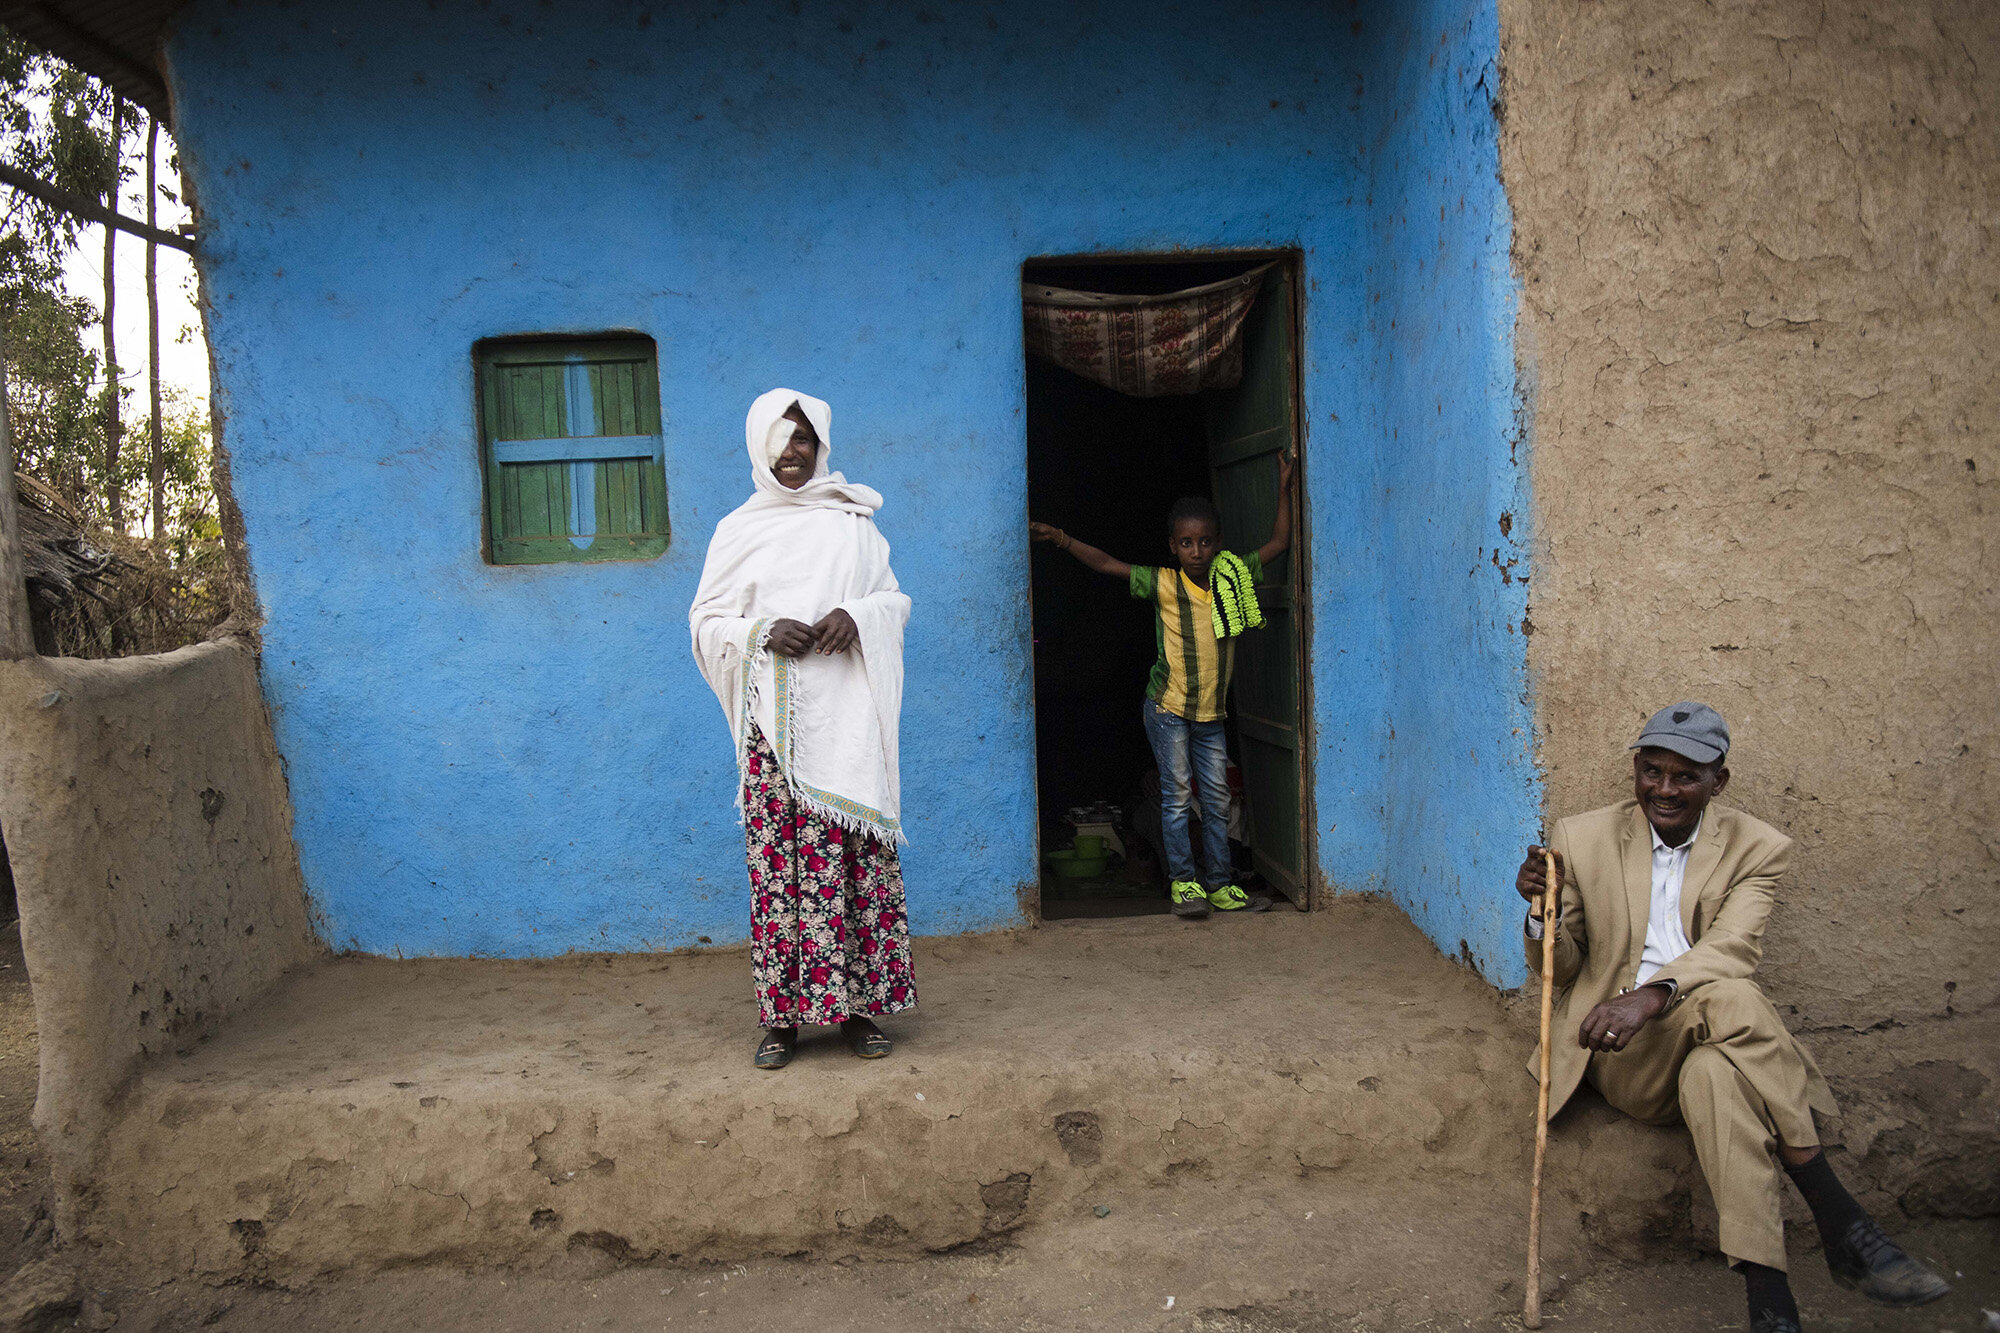  Asnaku Tufa stands outside her home after receiving corrective eye surgery for Trachomatous Trichiasis (TT) at a local clinic.   